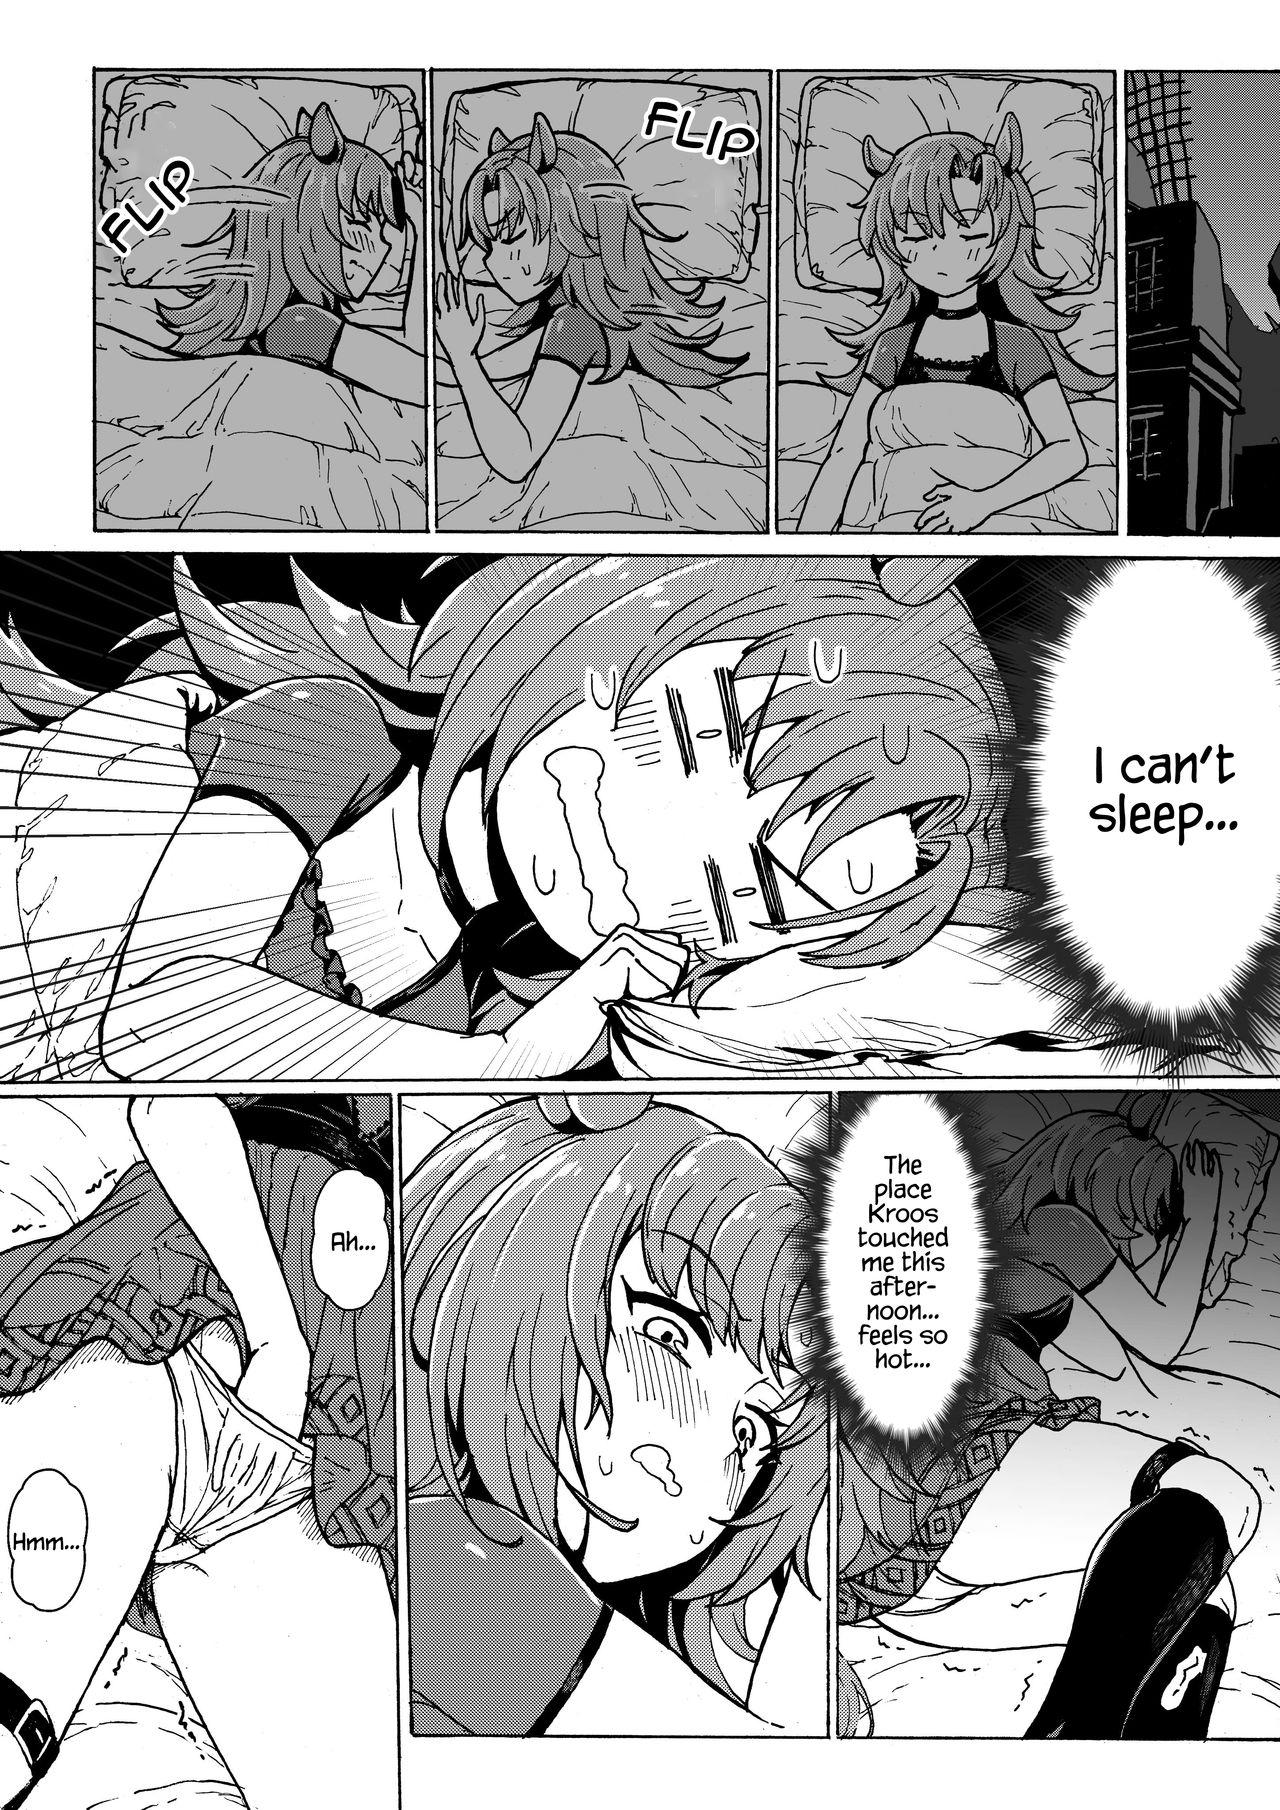 Tiny Girl Fang x Kroos - Arknights Indo - Page 4